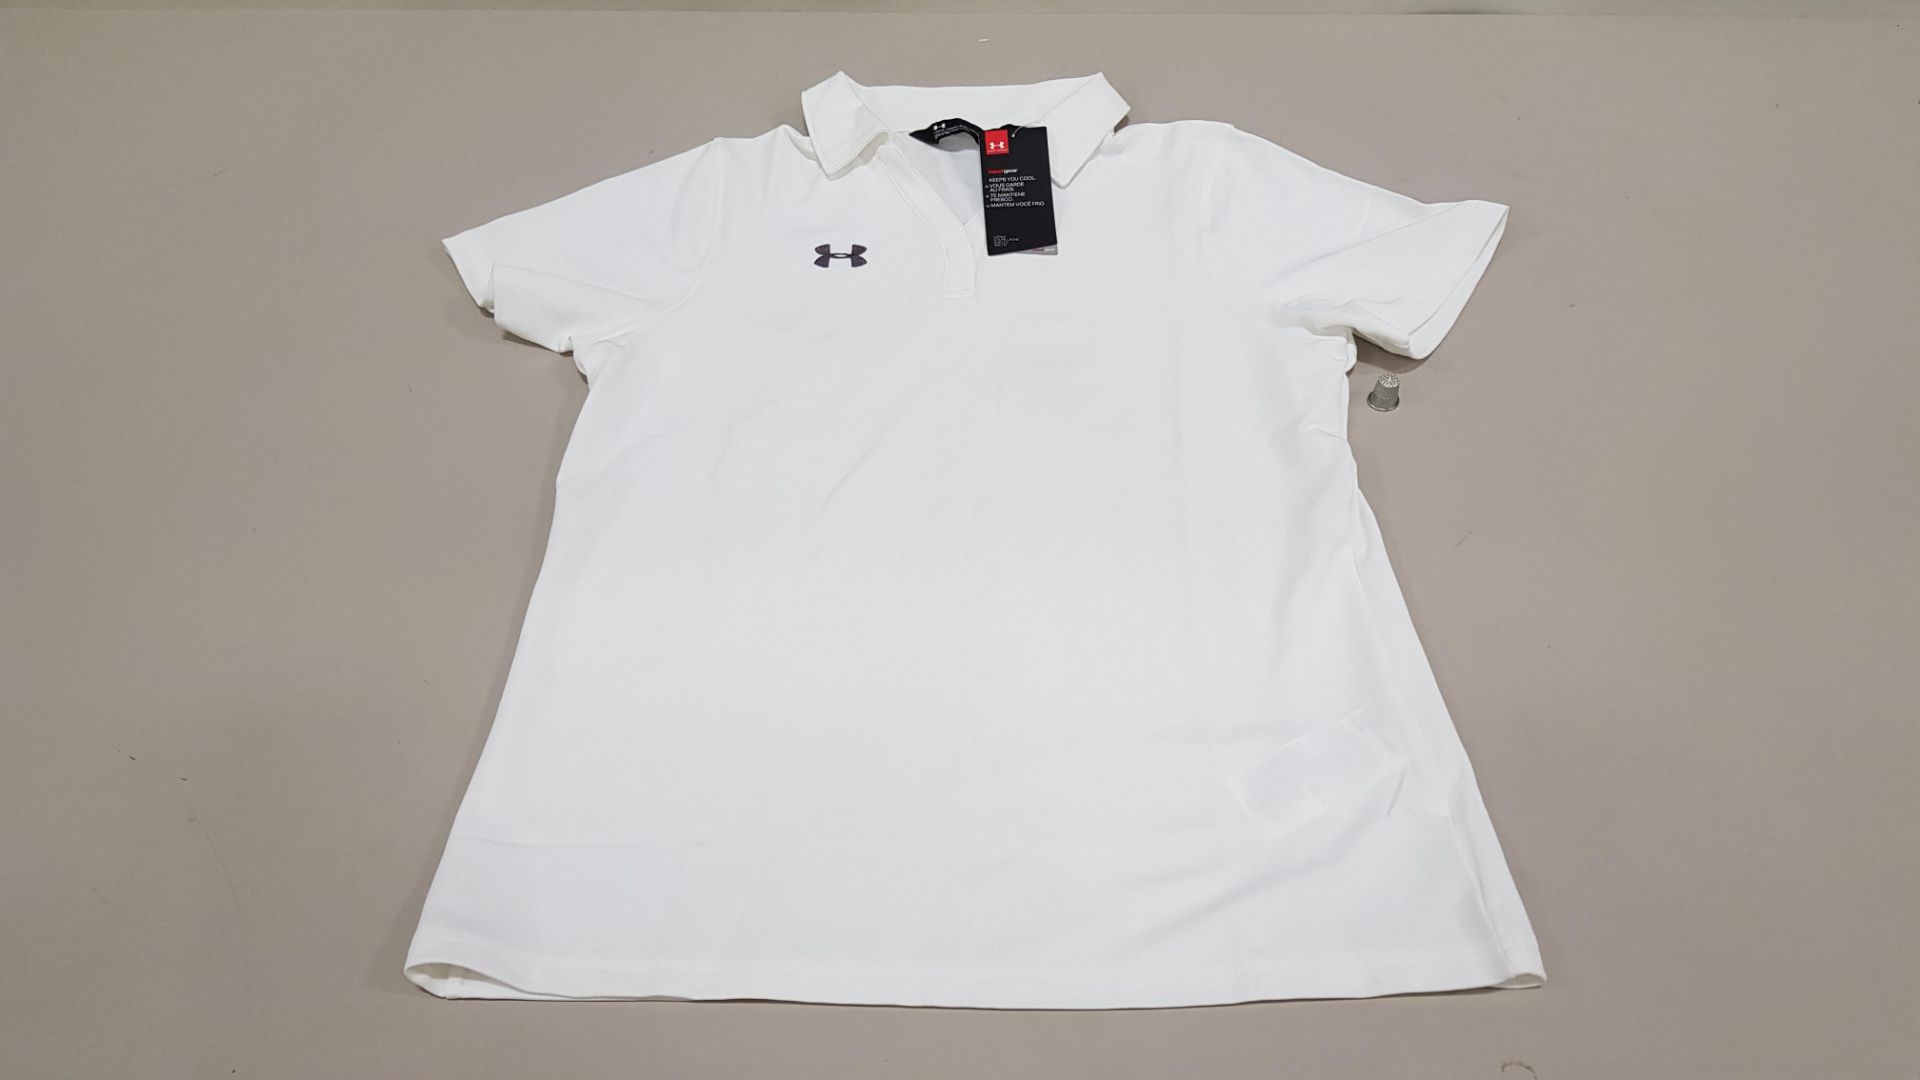 15 X BRAND NEW UNDER ARMOUR WOMENS SPORTS POLO SHIRTS SIZE SMALL